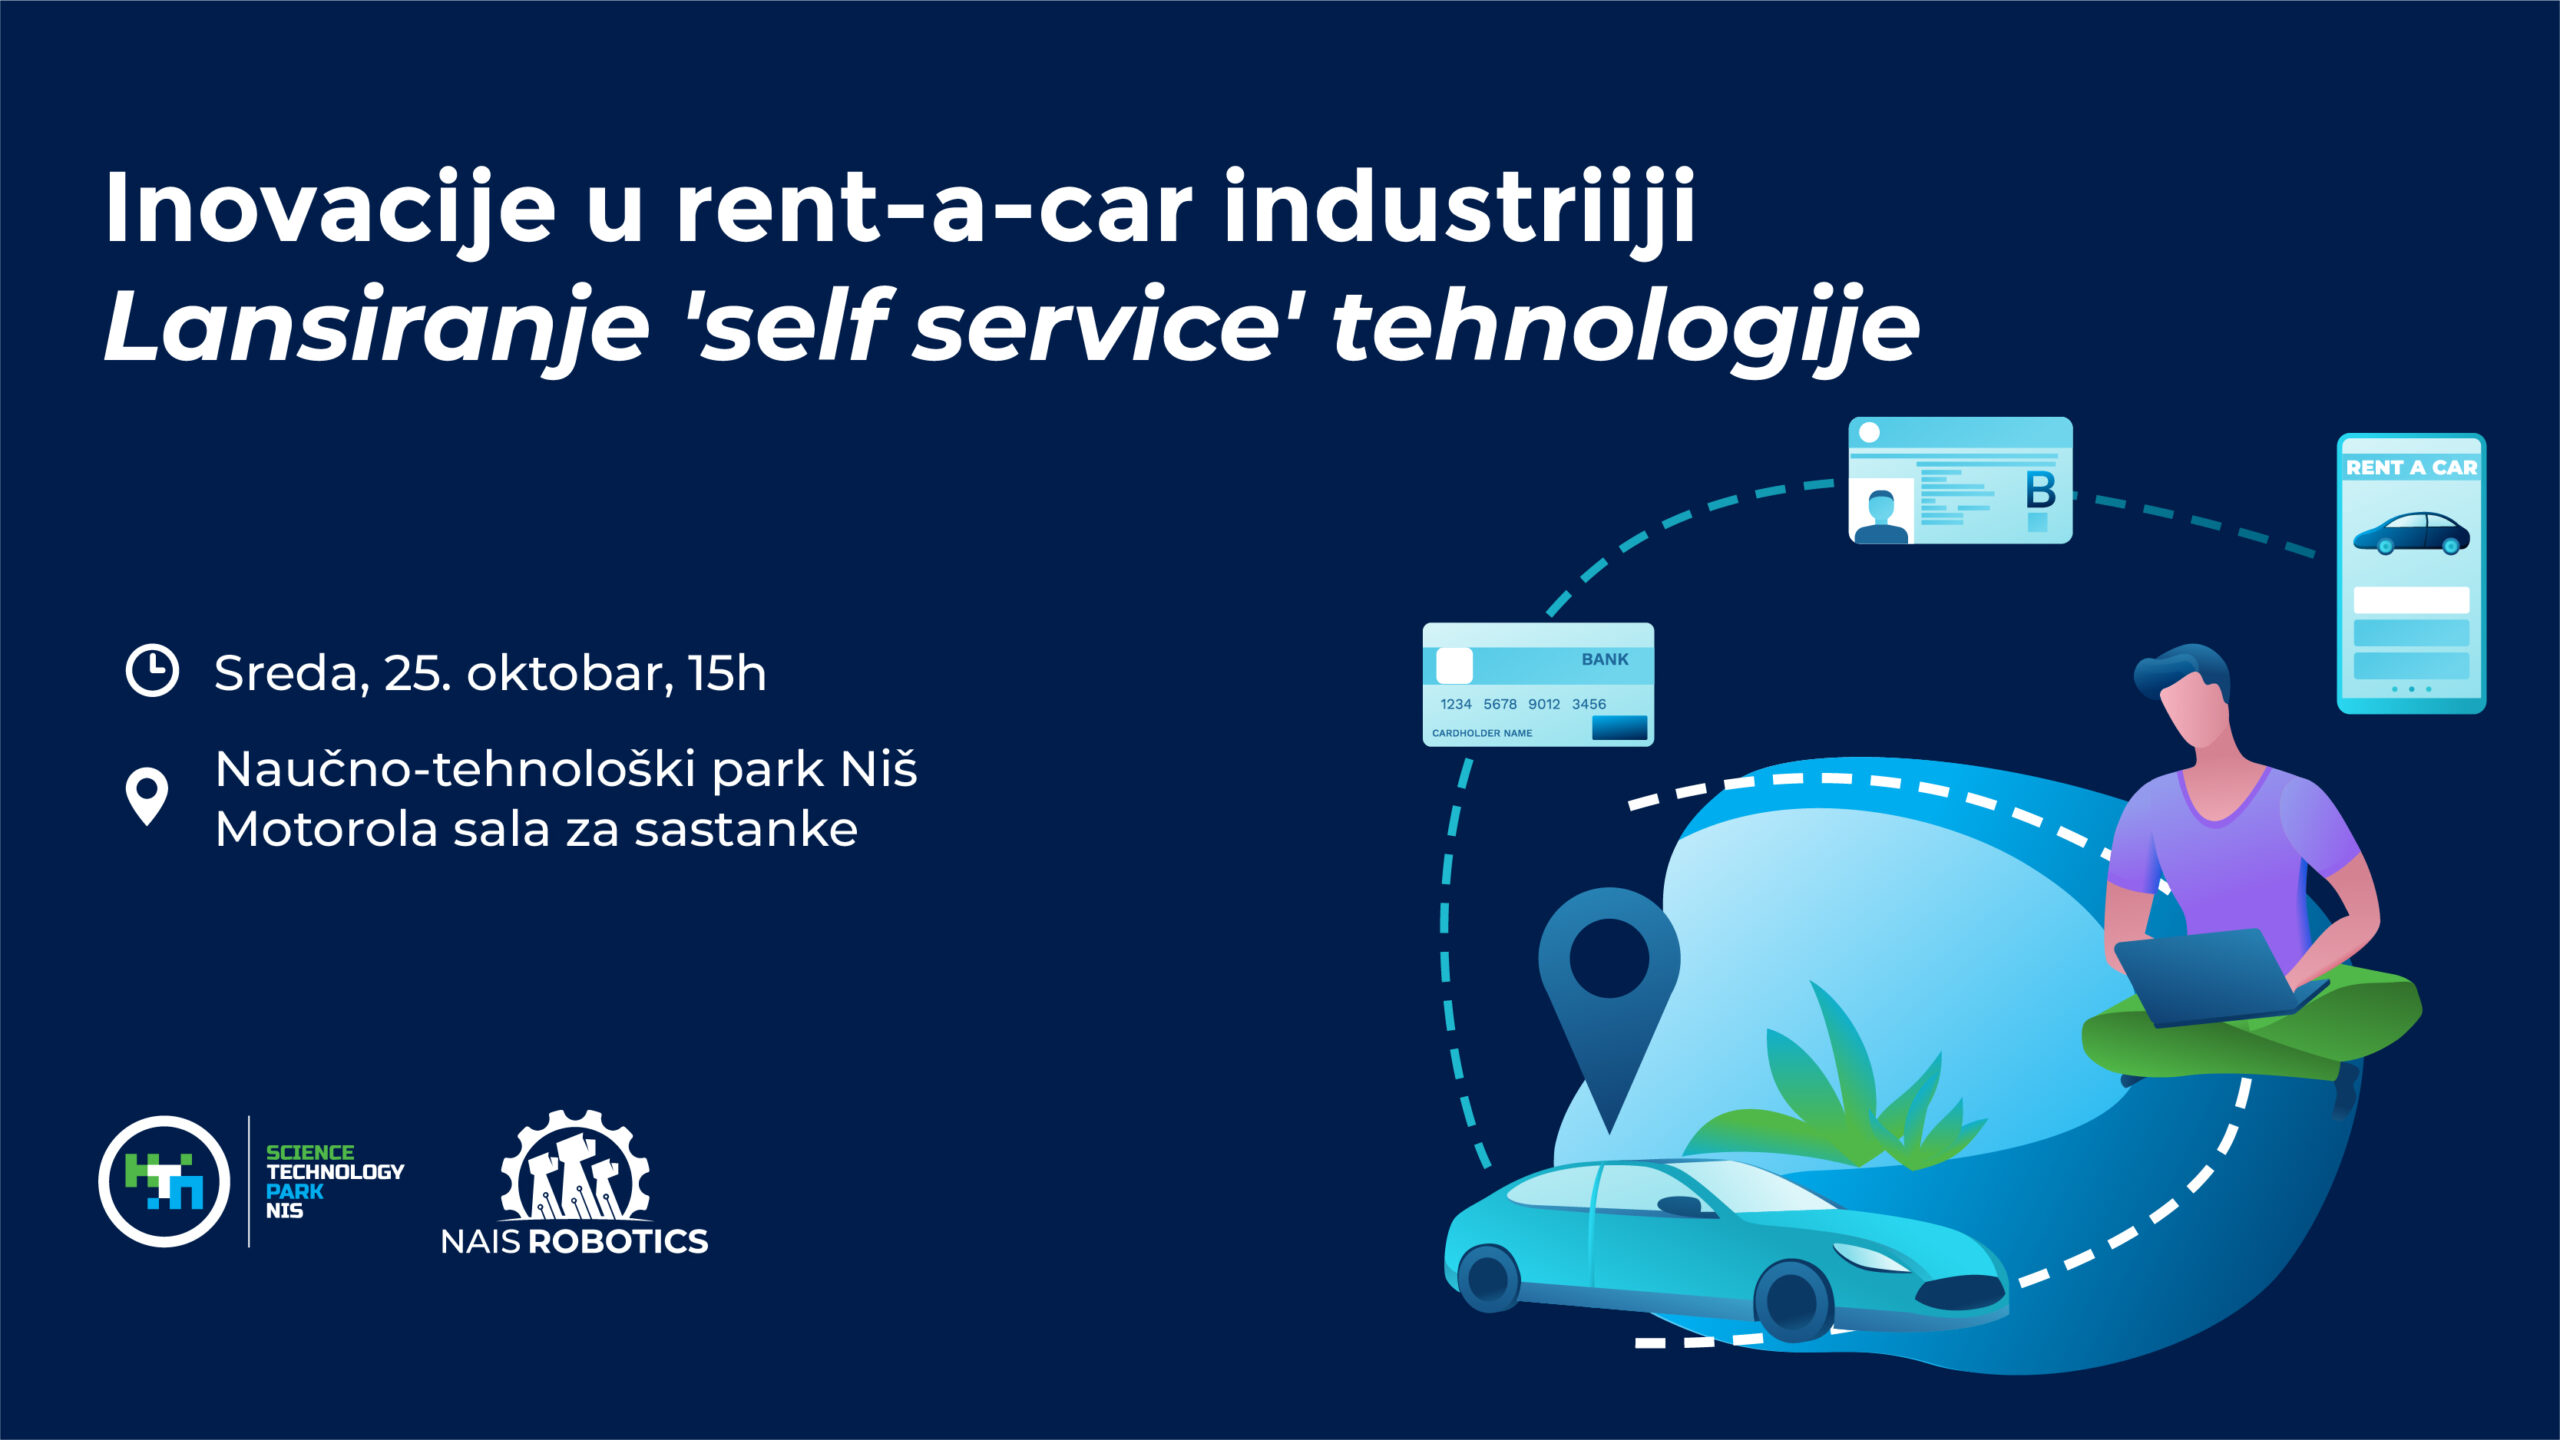 Innovation in the Rent-a-car Industry: Launching the “Self Service” Technology